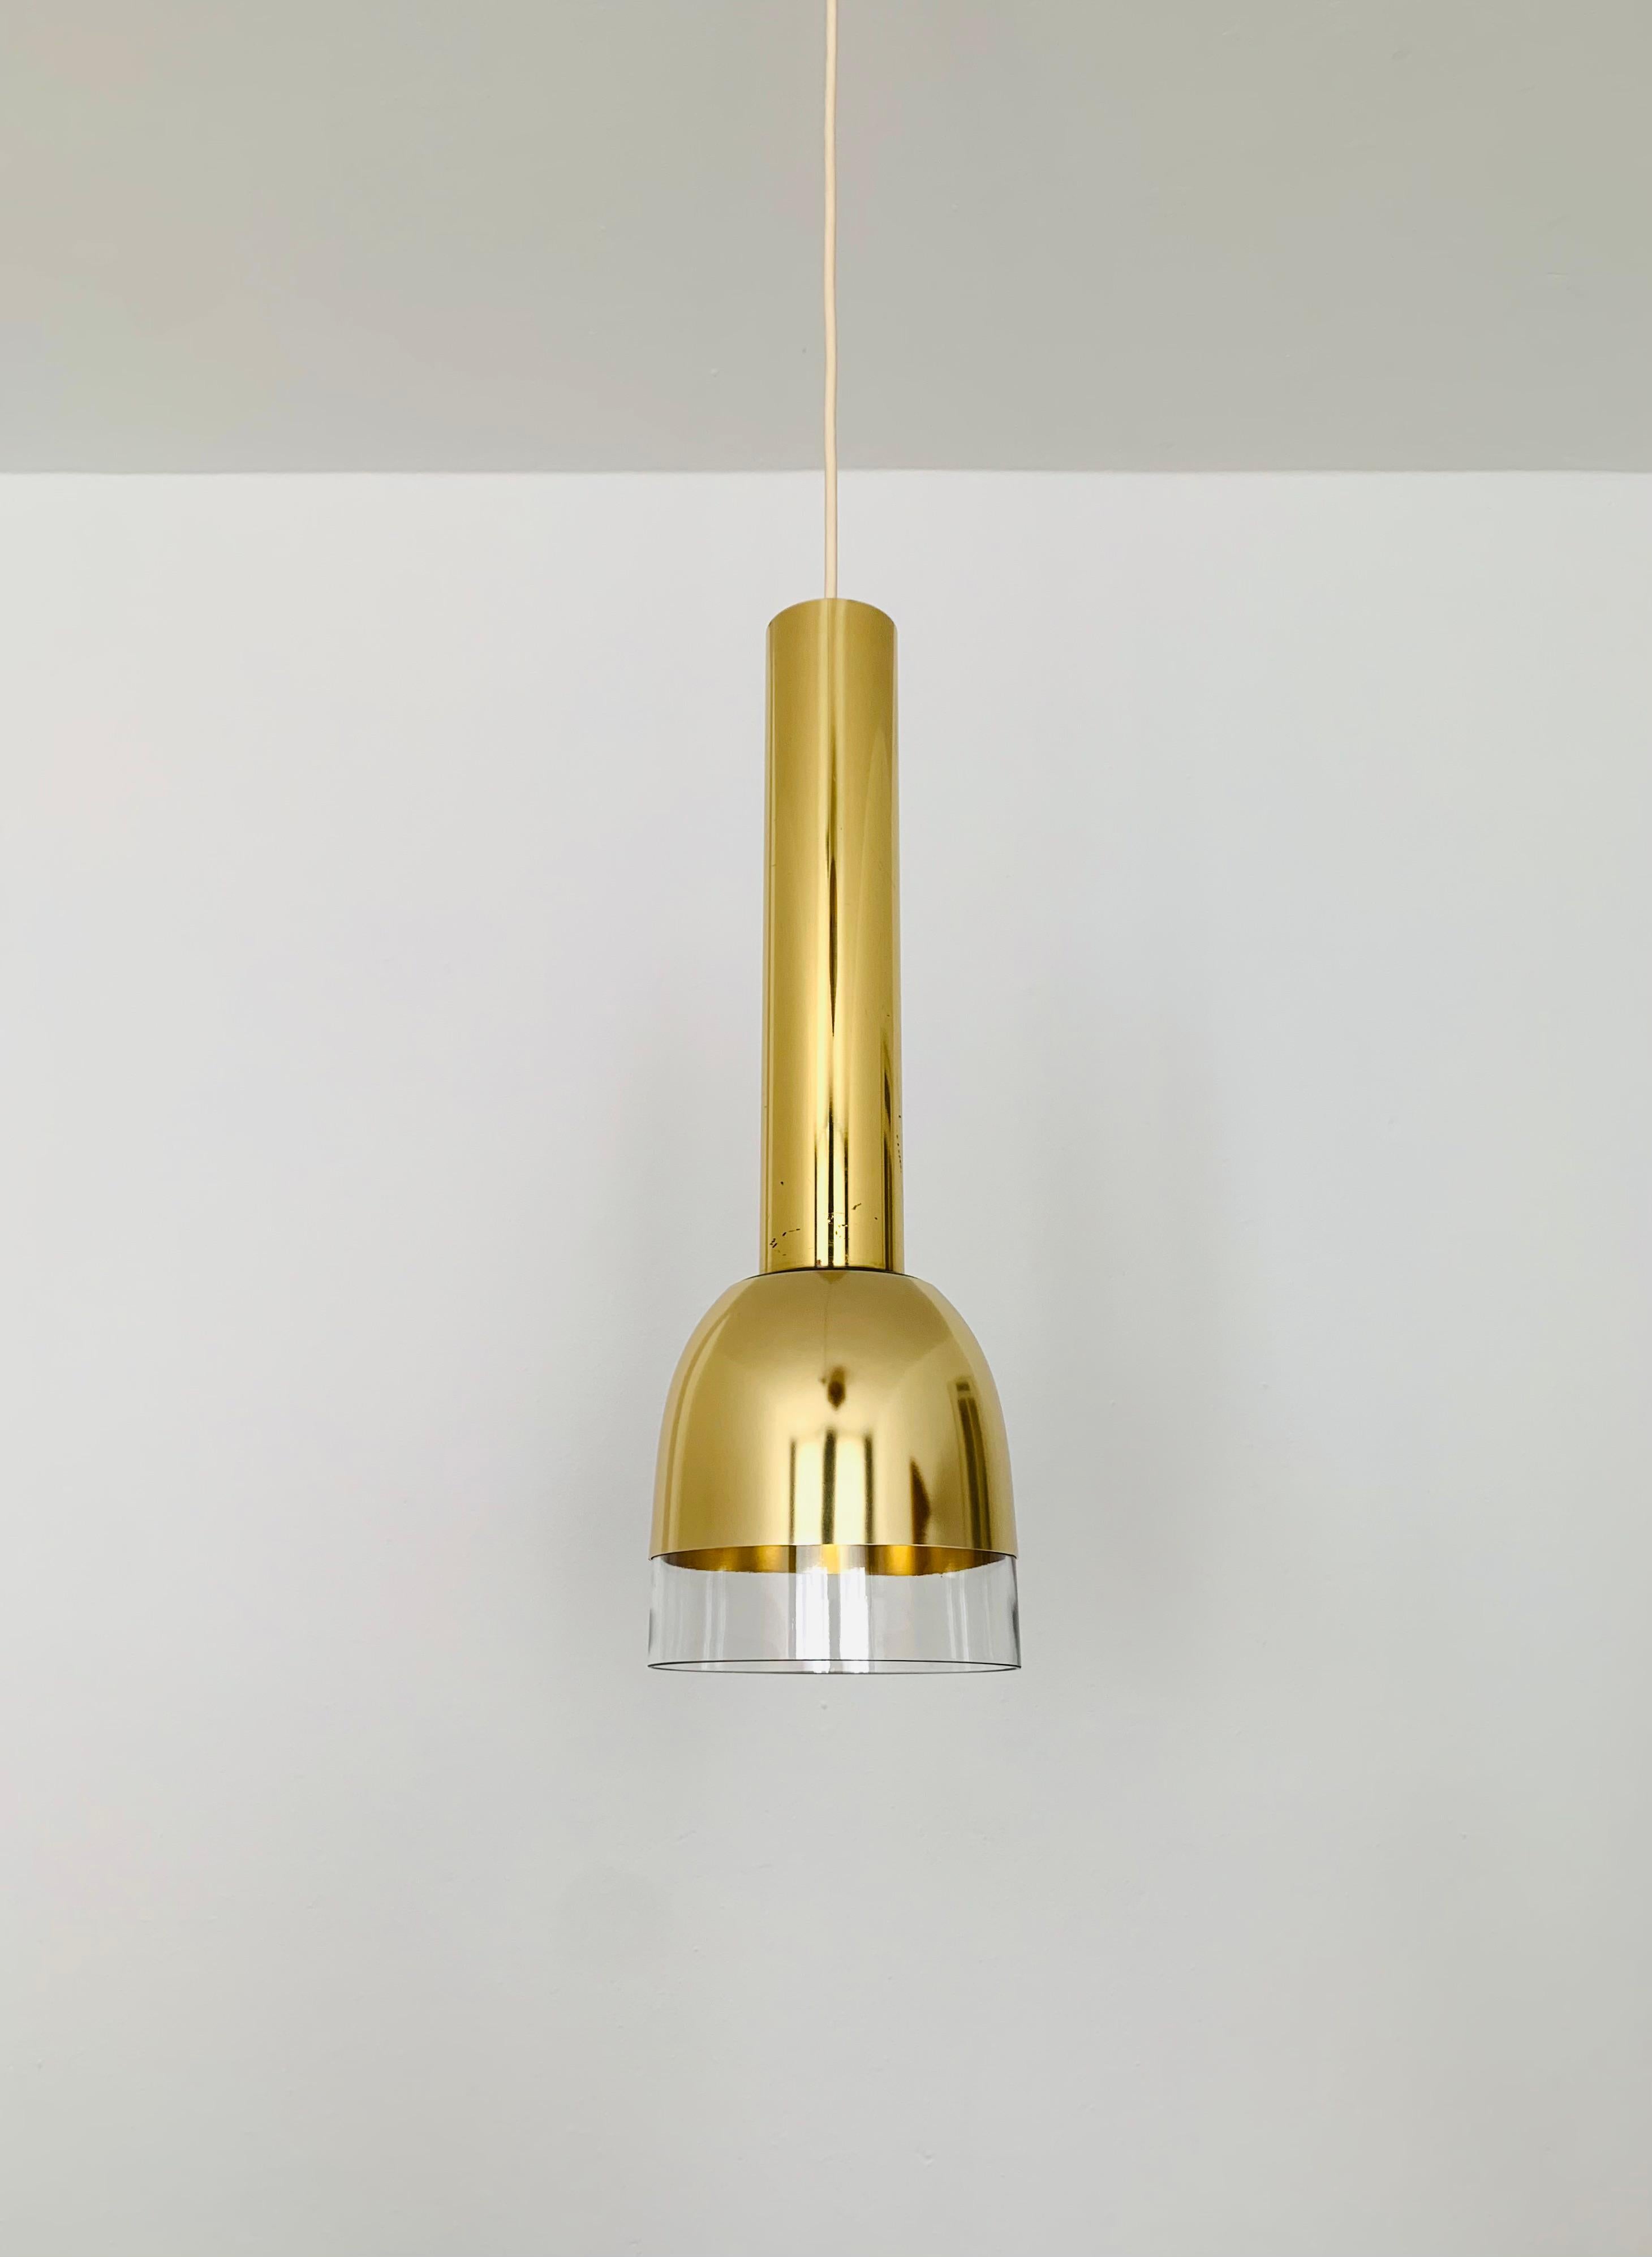 Very nice glass pendant lamps from the 1960s.
The lamps spreads a great play of light in the room.
Wonderful workmanship of the highest quality.

Manufacturer: Glashütte Limburg

Condition:

Very good vintage condition with slight signs of